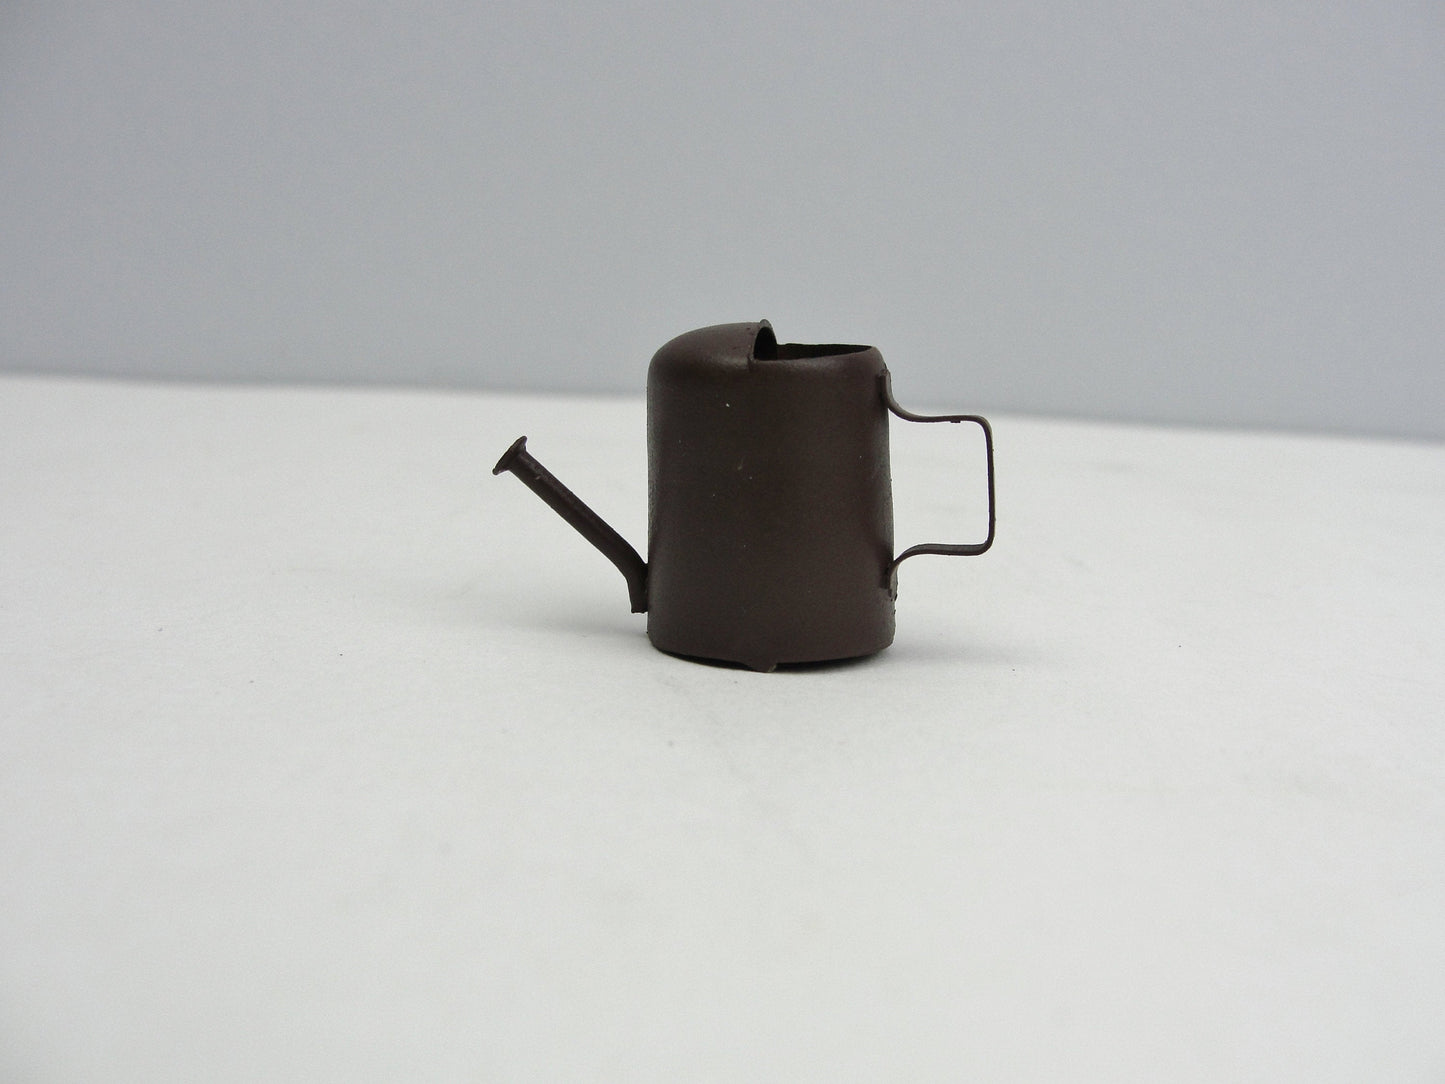 Miniature rust colored metal watering can